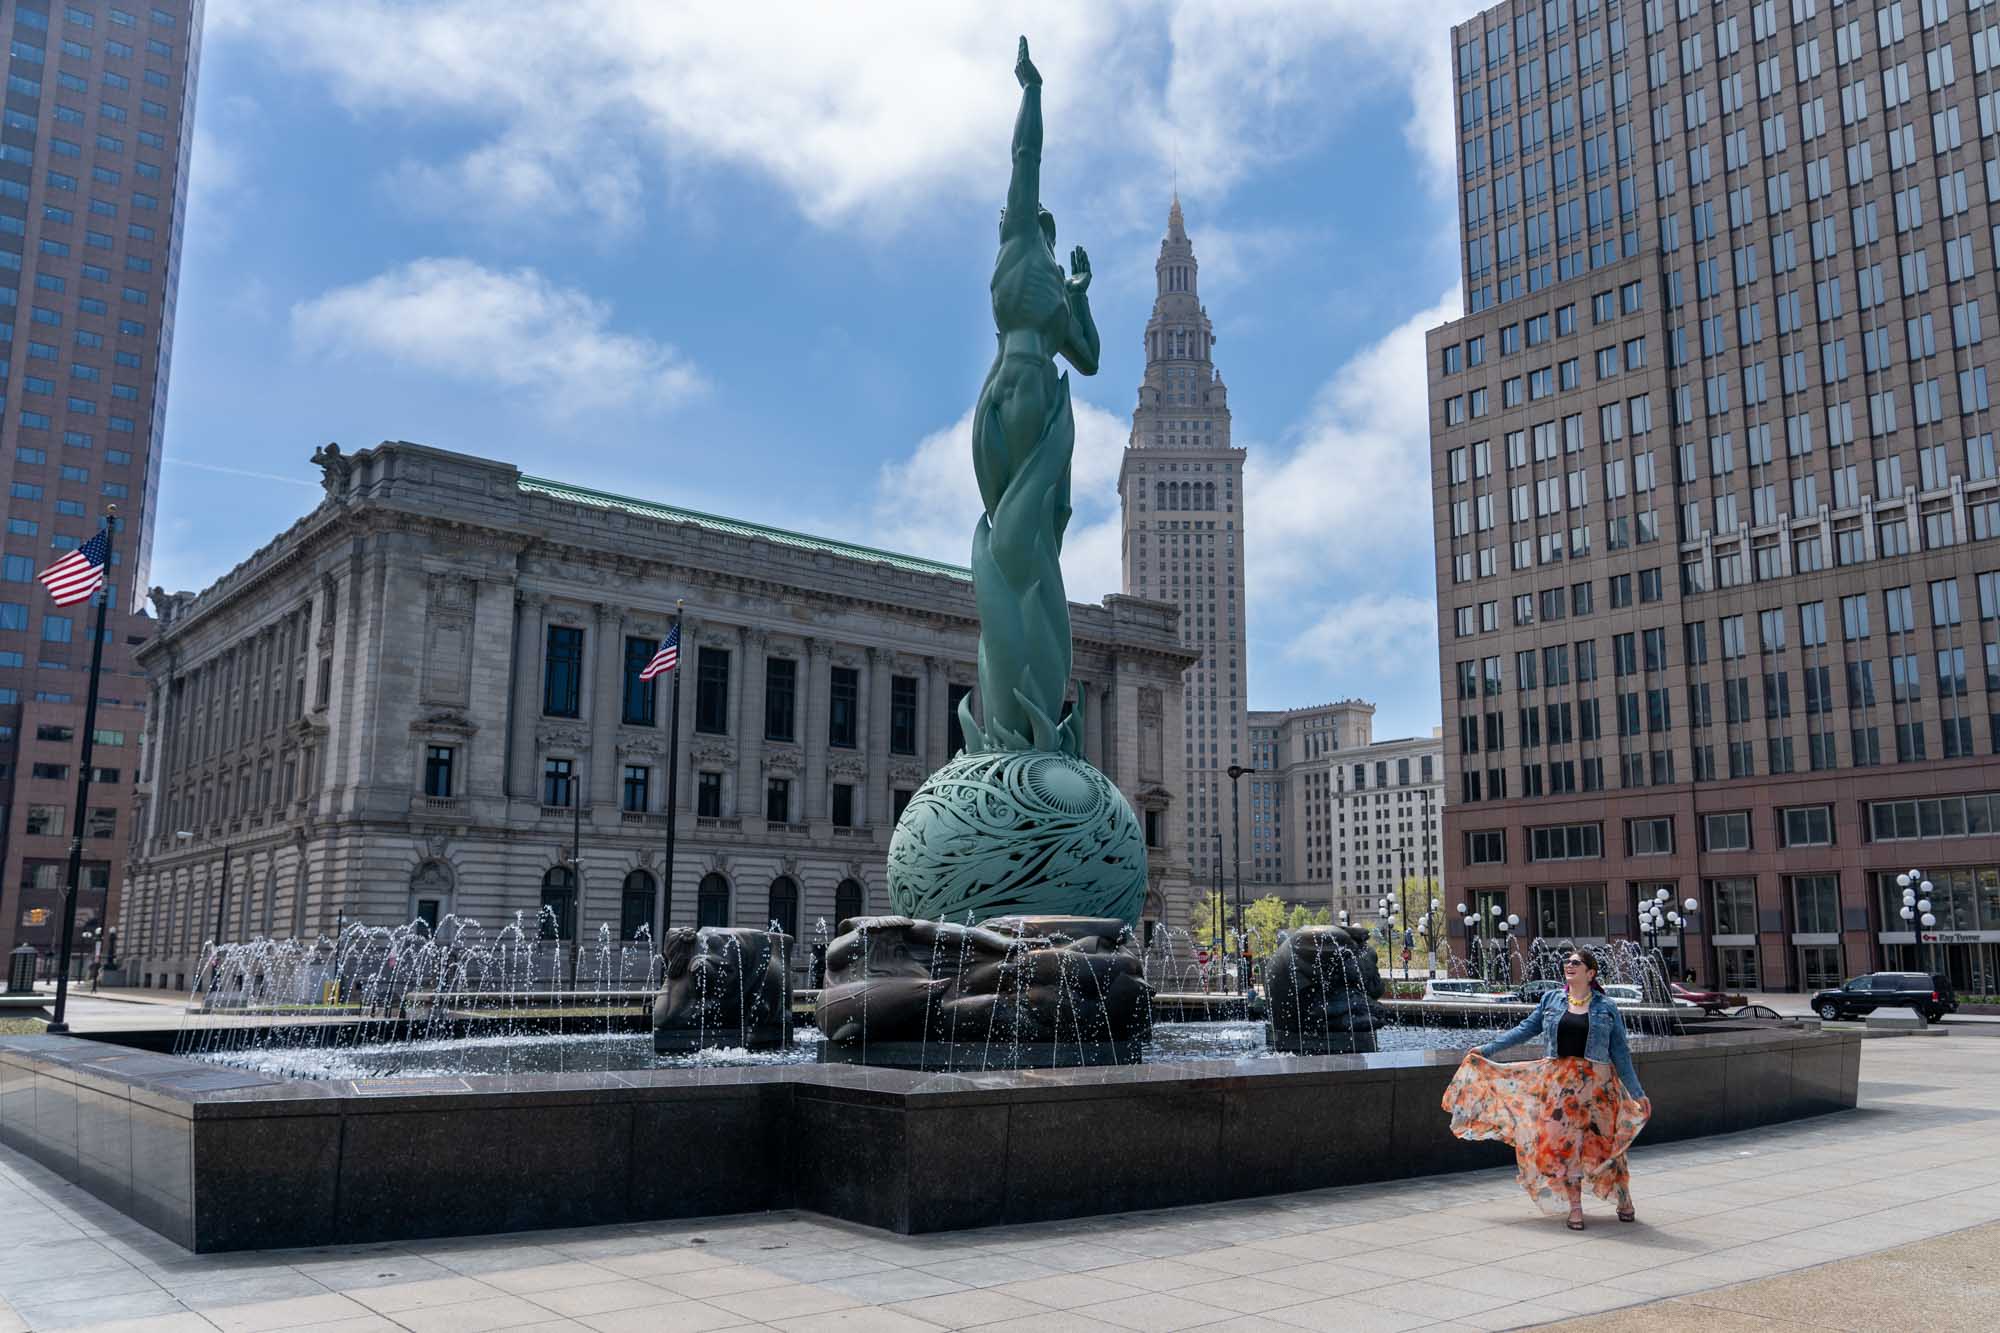 Fountain of Eternal Life in Cleveland